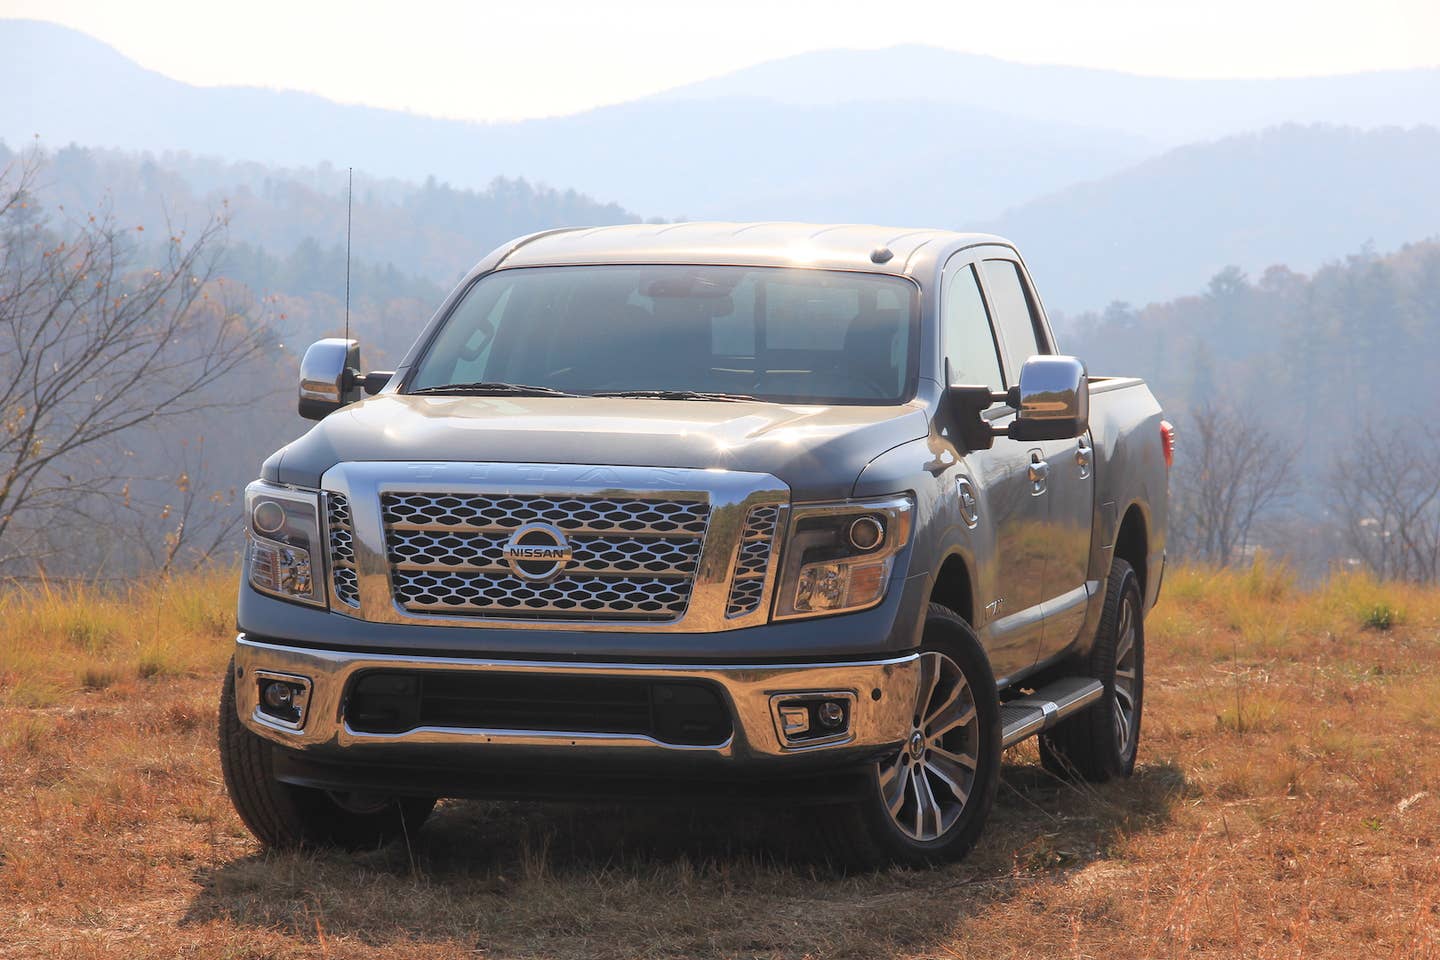 The 2017 Nissan Titan V8 4×4 Can Handle Pretty Much Anything You Throw Its Way